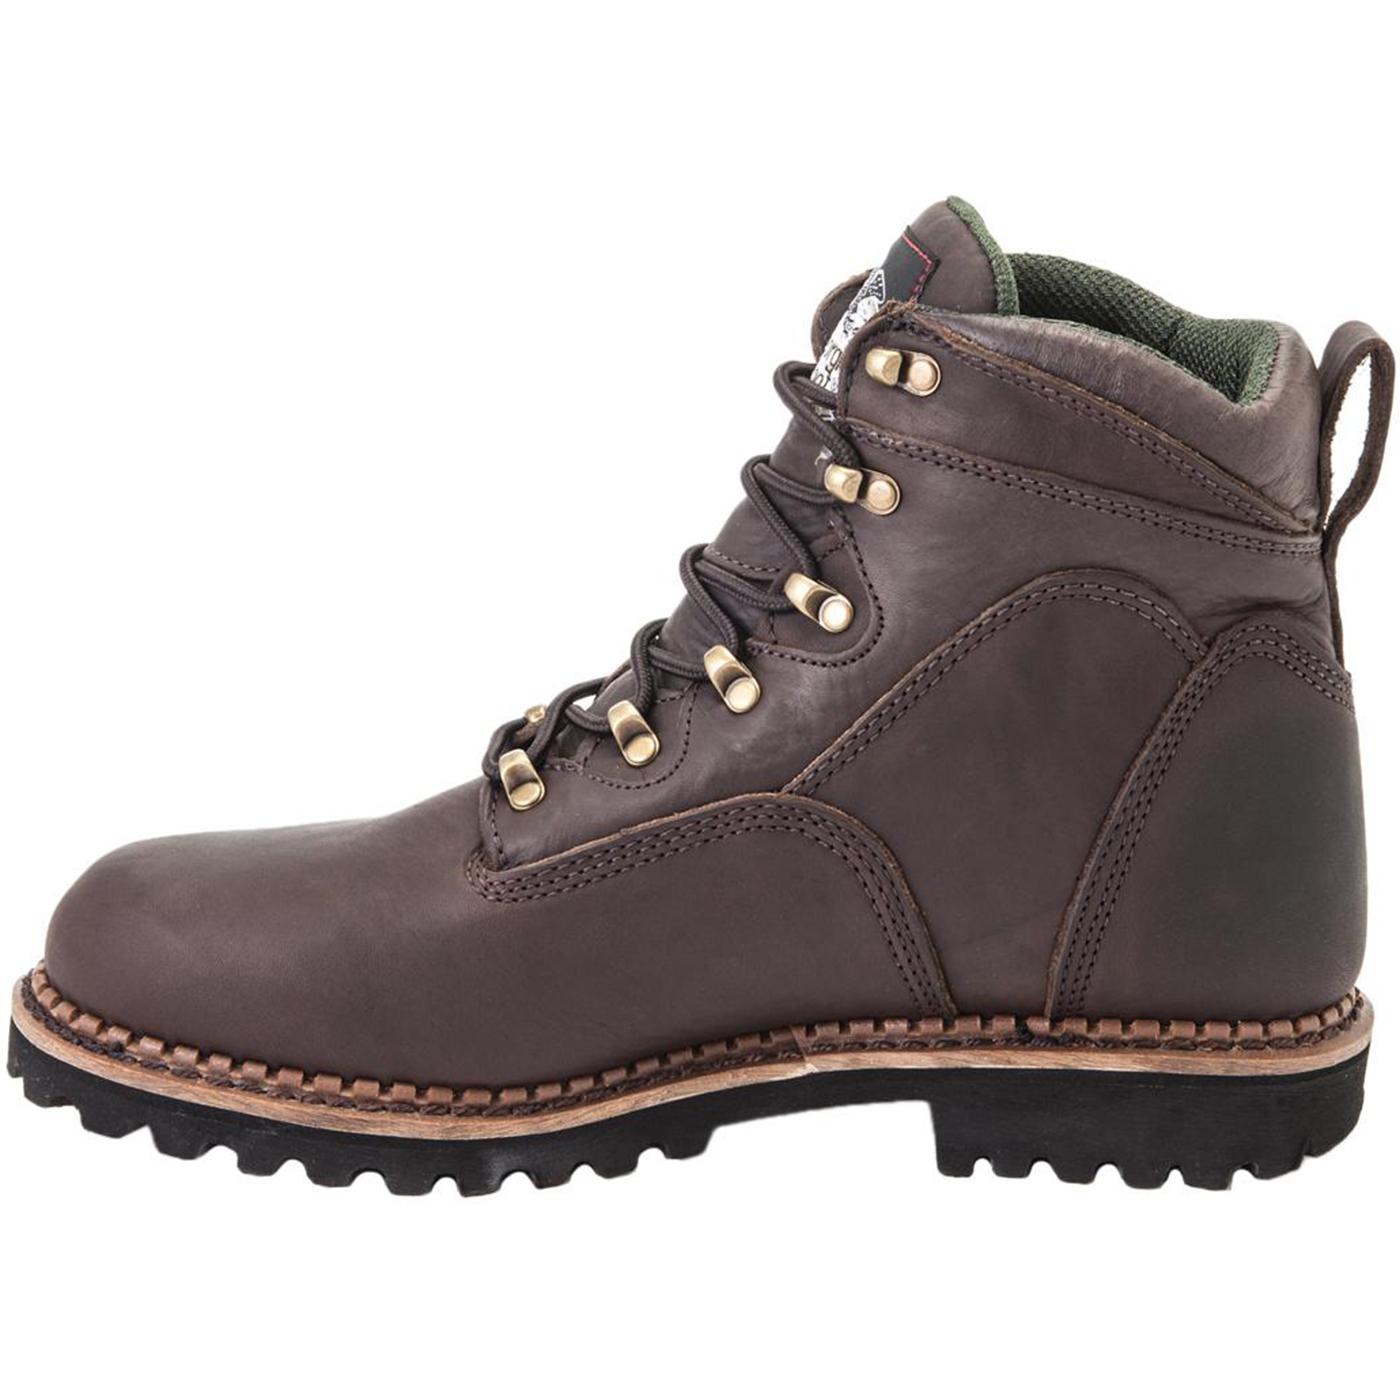 Georgia Boot: Men's Renegades Lace-Up Waterproof Brown Work Boots ...